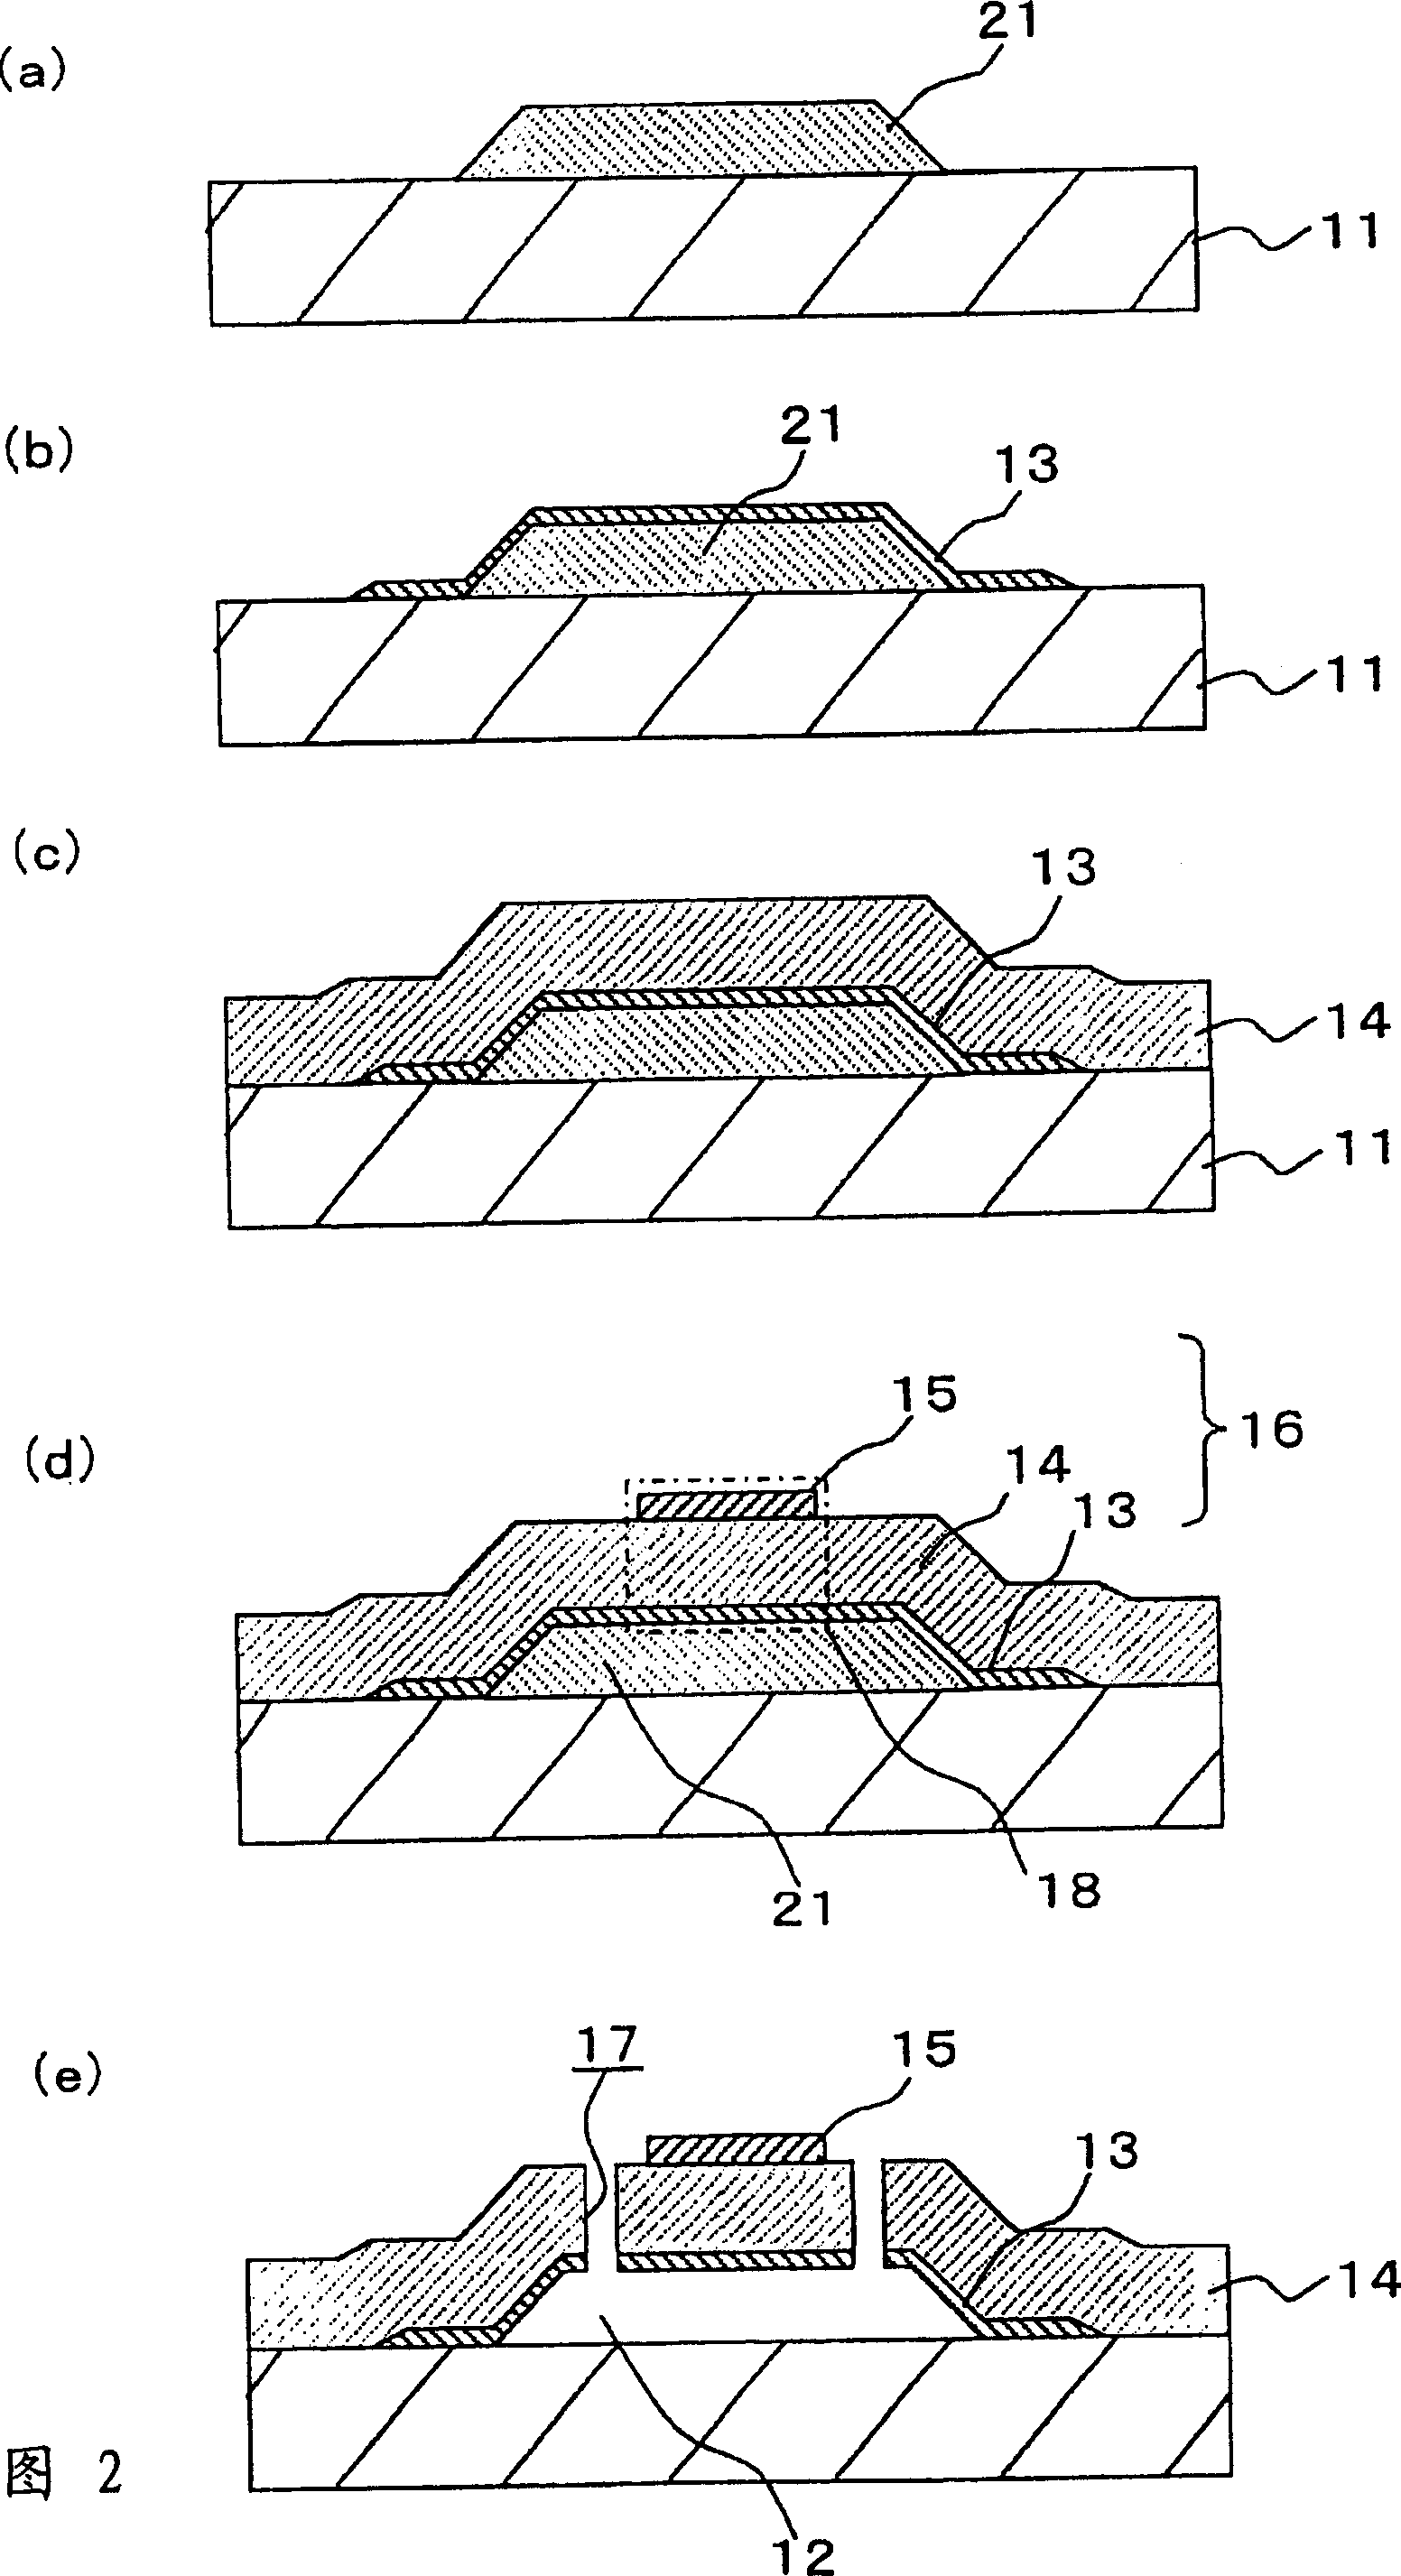 Piezoelectric resonator element and method of manufacturing same